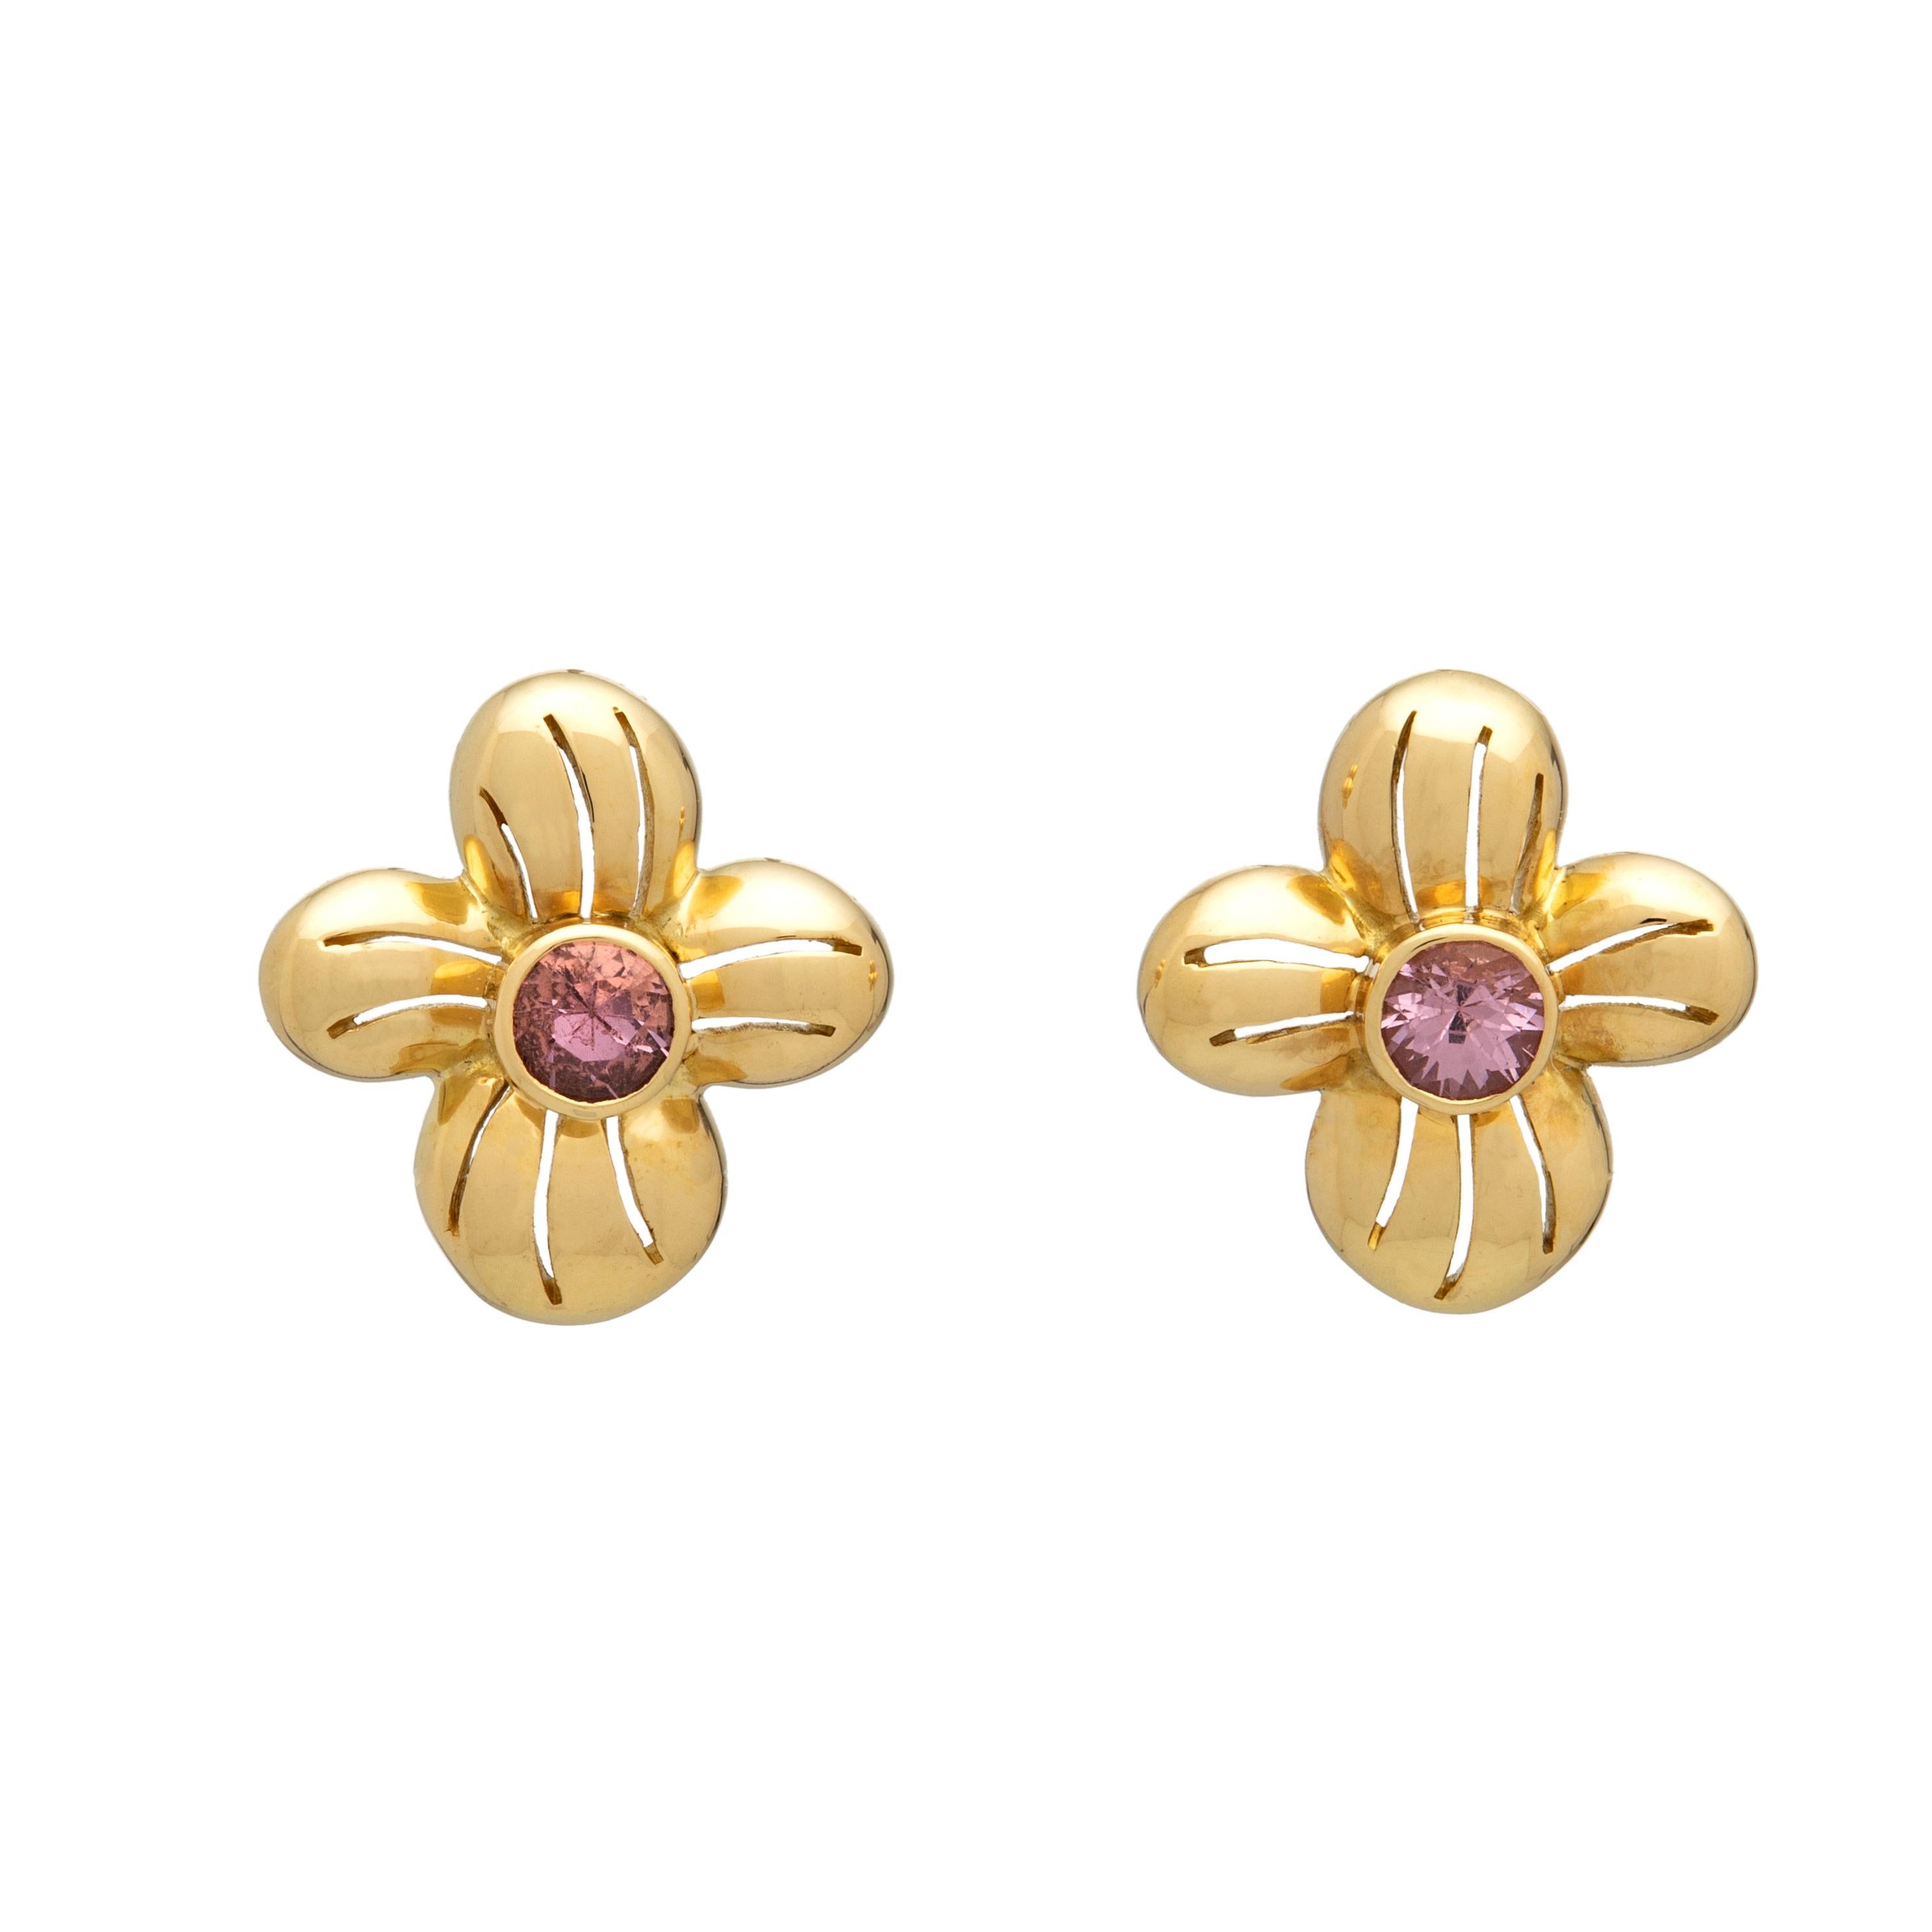 Round Cut 18k Gold Pierced Flower Earrings with Pink Spinels, by Gloria Bass For Sale